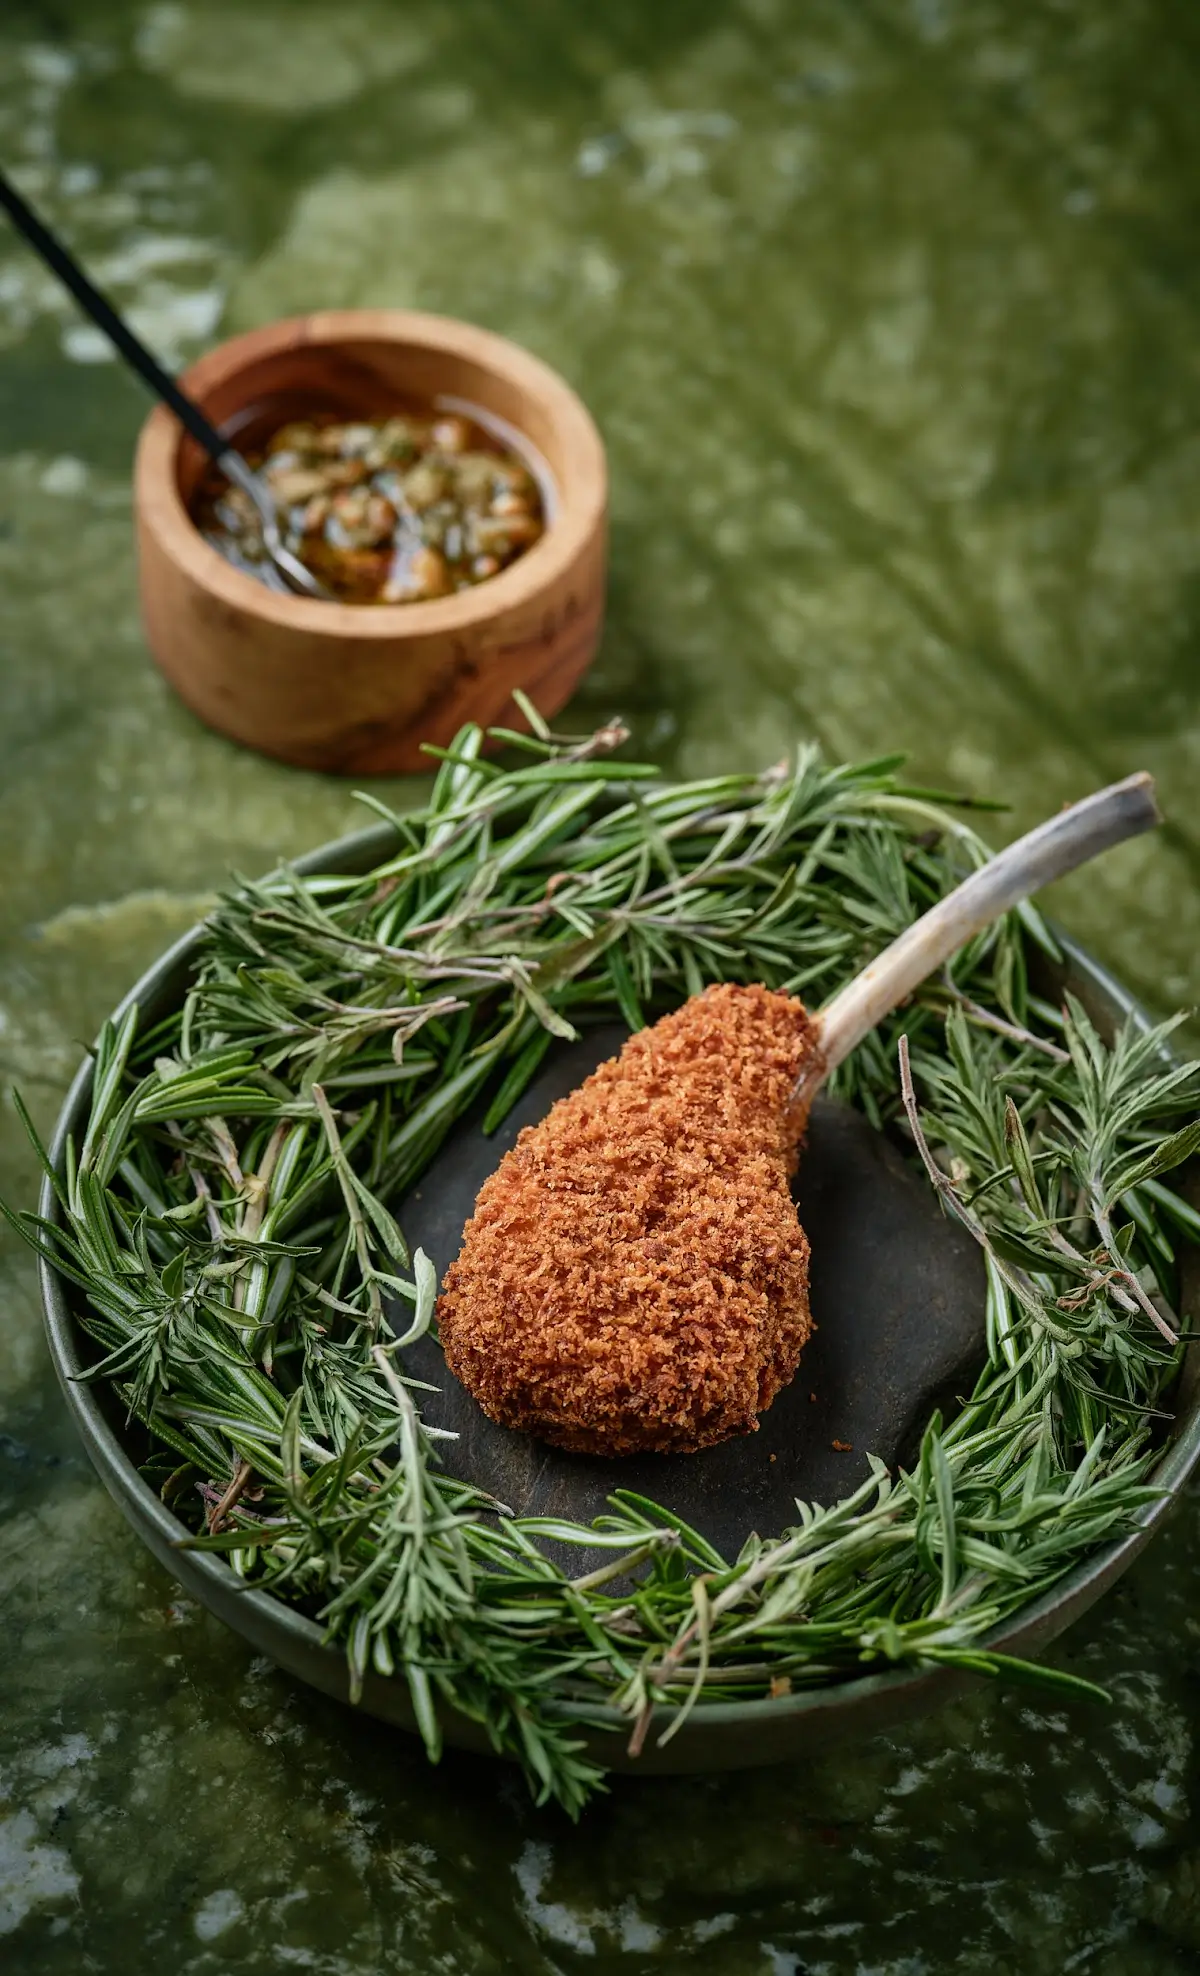 Breaded lamb chop surrounded by fresh rosemary at Contraste, a Michelin Star restaurant in Paris.